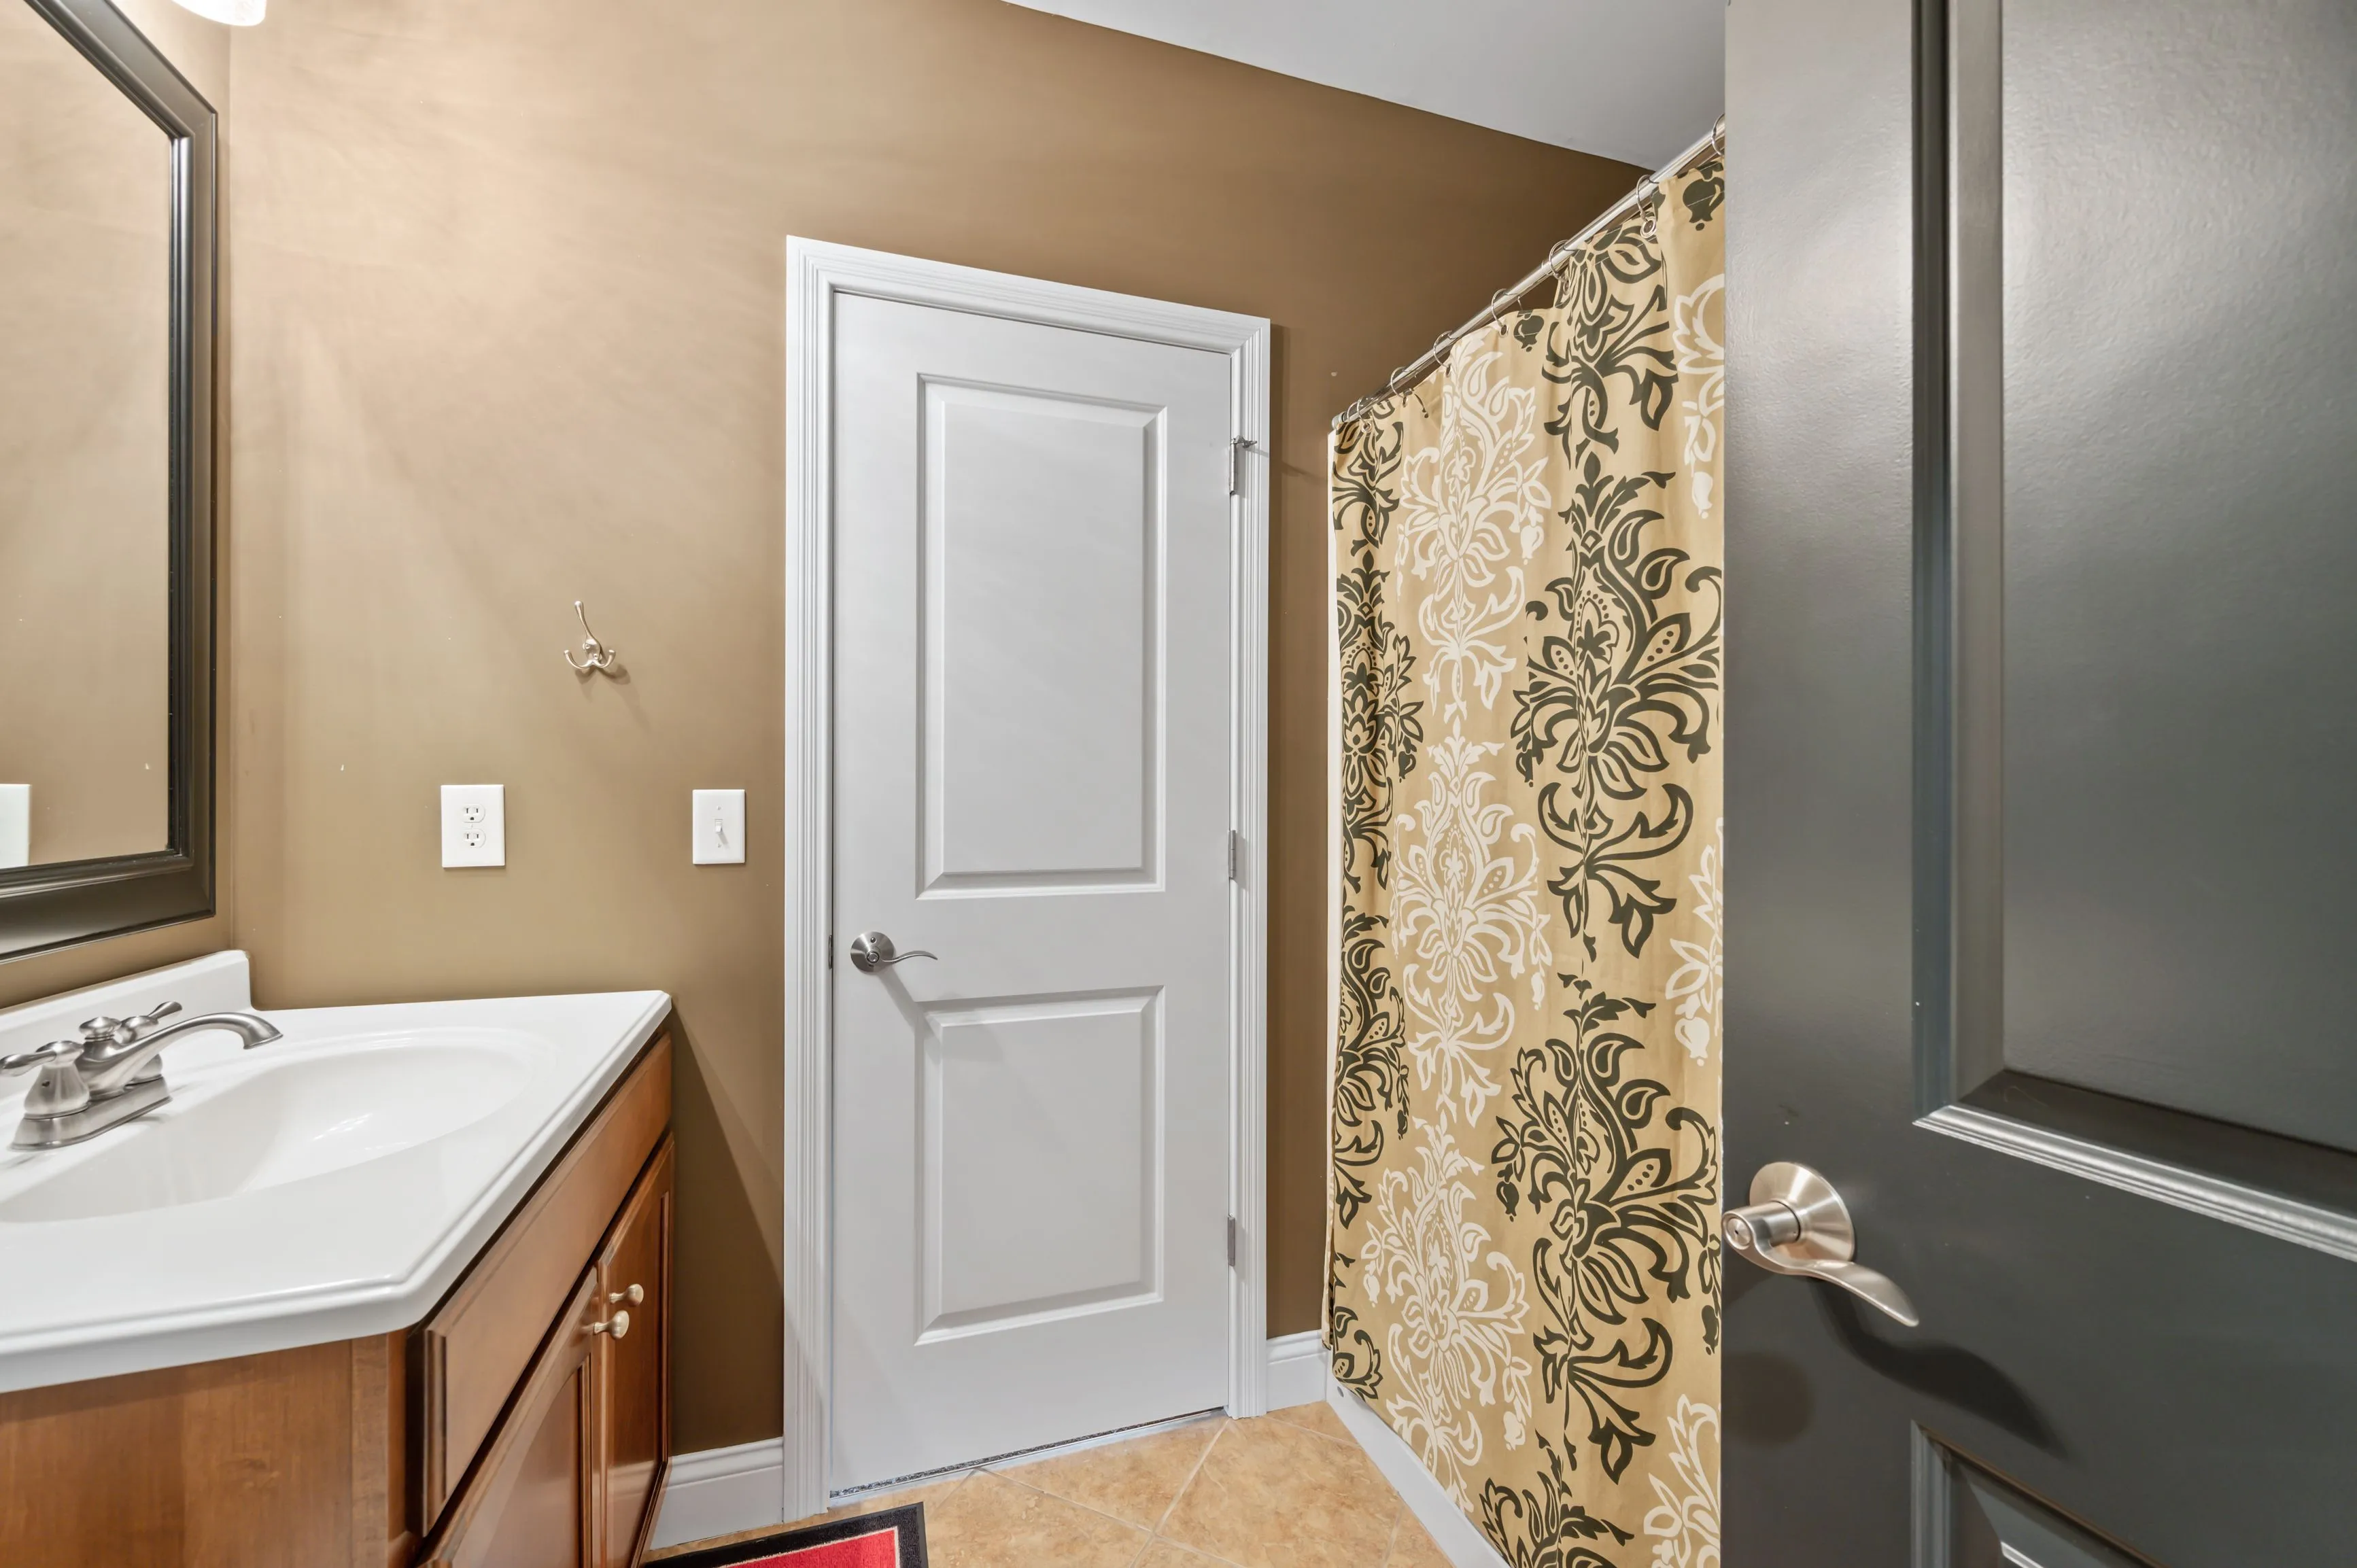 Interior of a modern bathroom featuring a white door, tan walls, a patterned shower curtain, a wooden vanity with a sink, and a gray towel hanging on the towel bar.